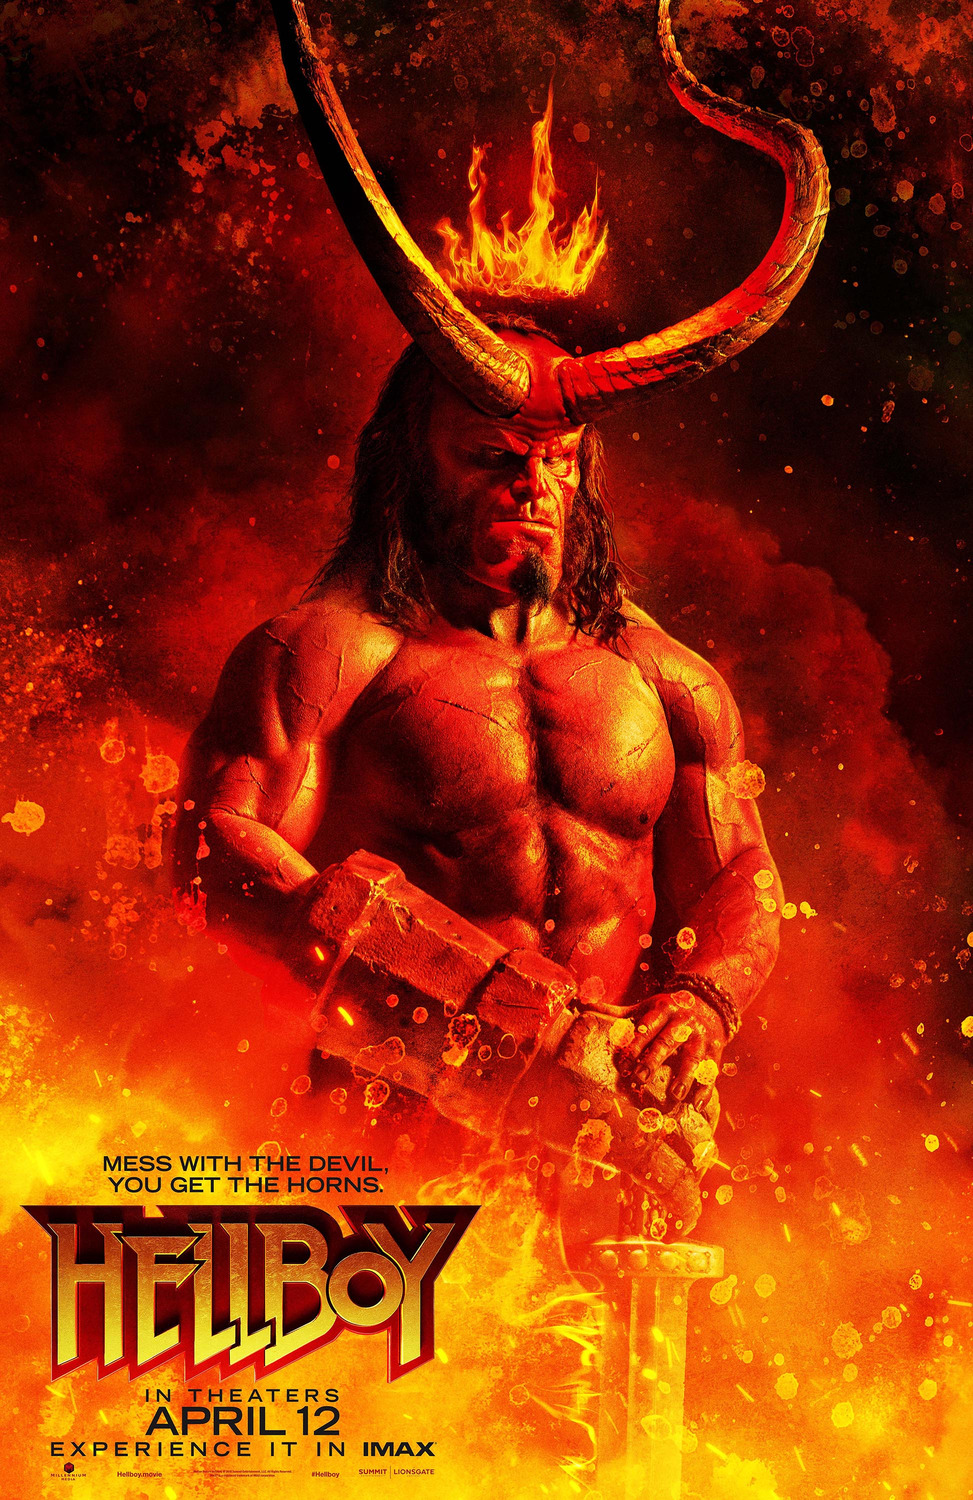 David Harbour Hellboy Movie Poster Image Wallpapers